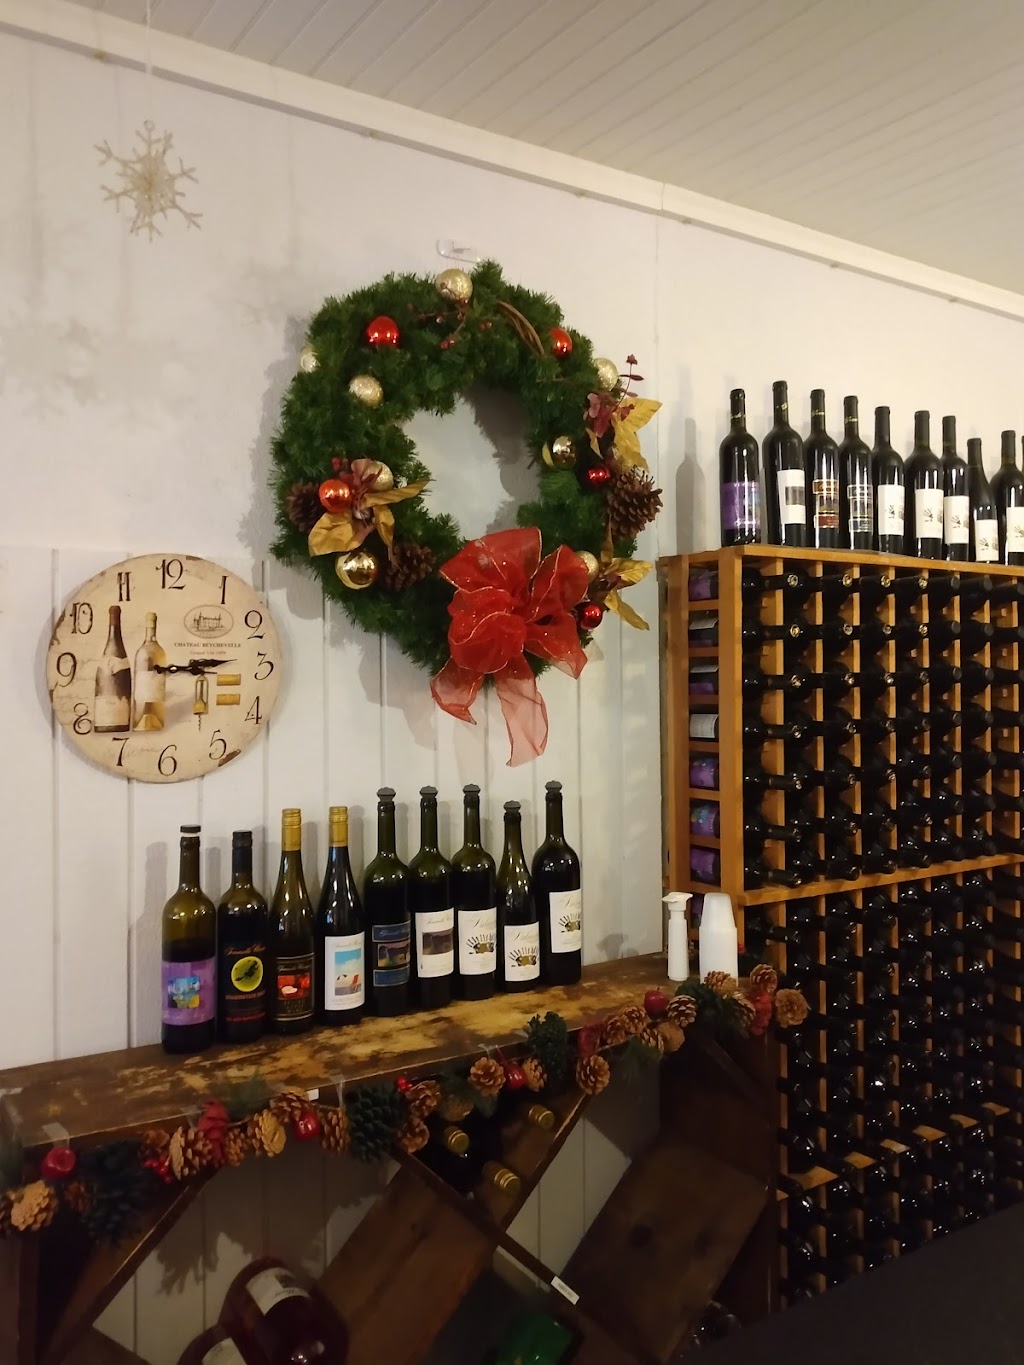 Tomasello Winery Tasting Room at Wemrock Orchards | 300 Hwy 33 &, Wemrock Rd, Freehold, NJ 07728 | Phone: (800) 666-9463